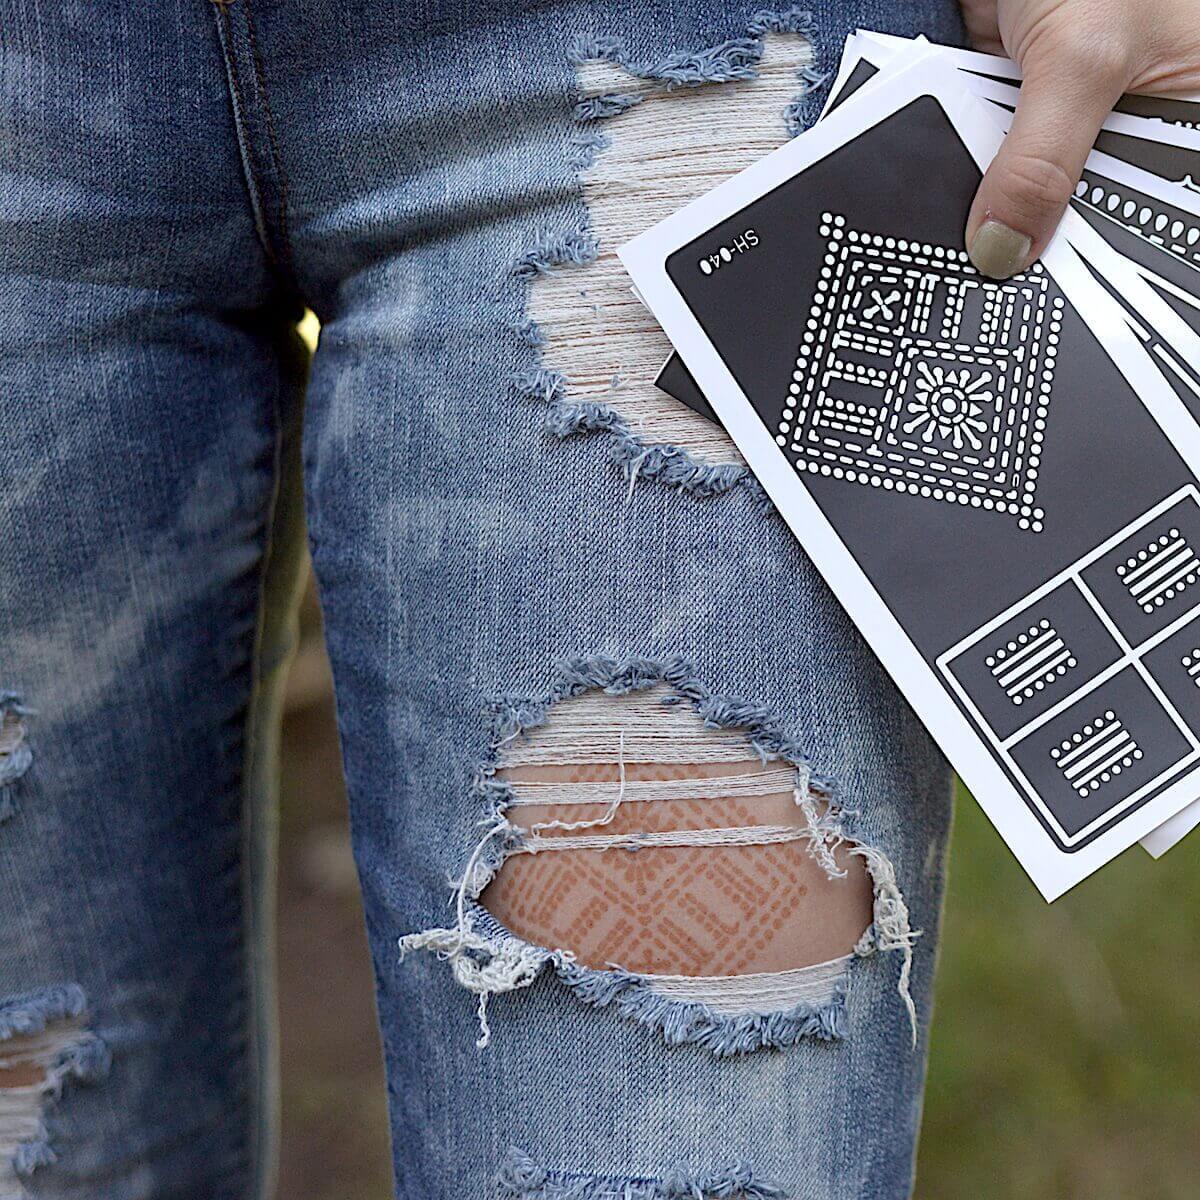 Fauzie - Woman with henna tattoo under ripped jeans and holding sticker stencils